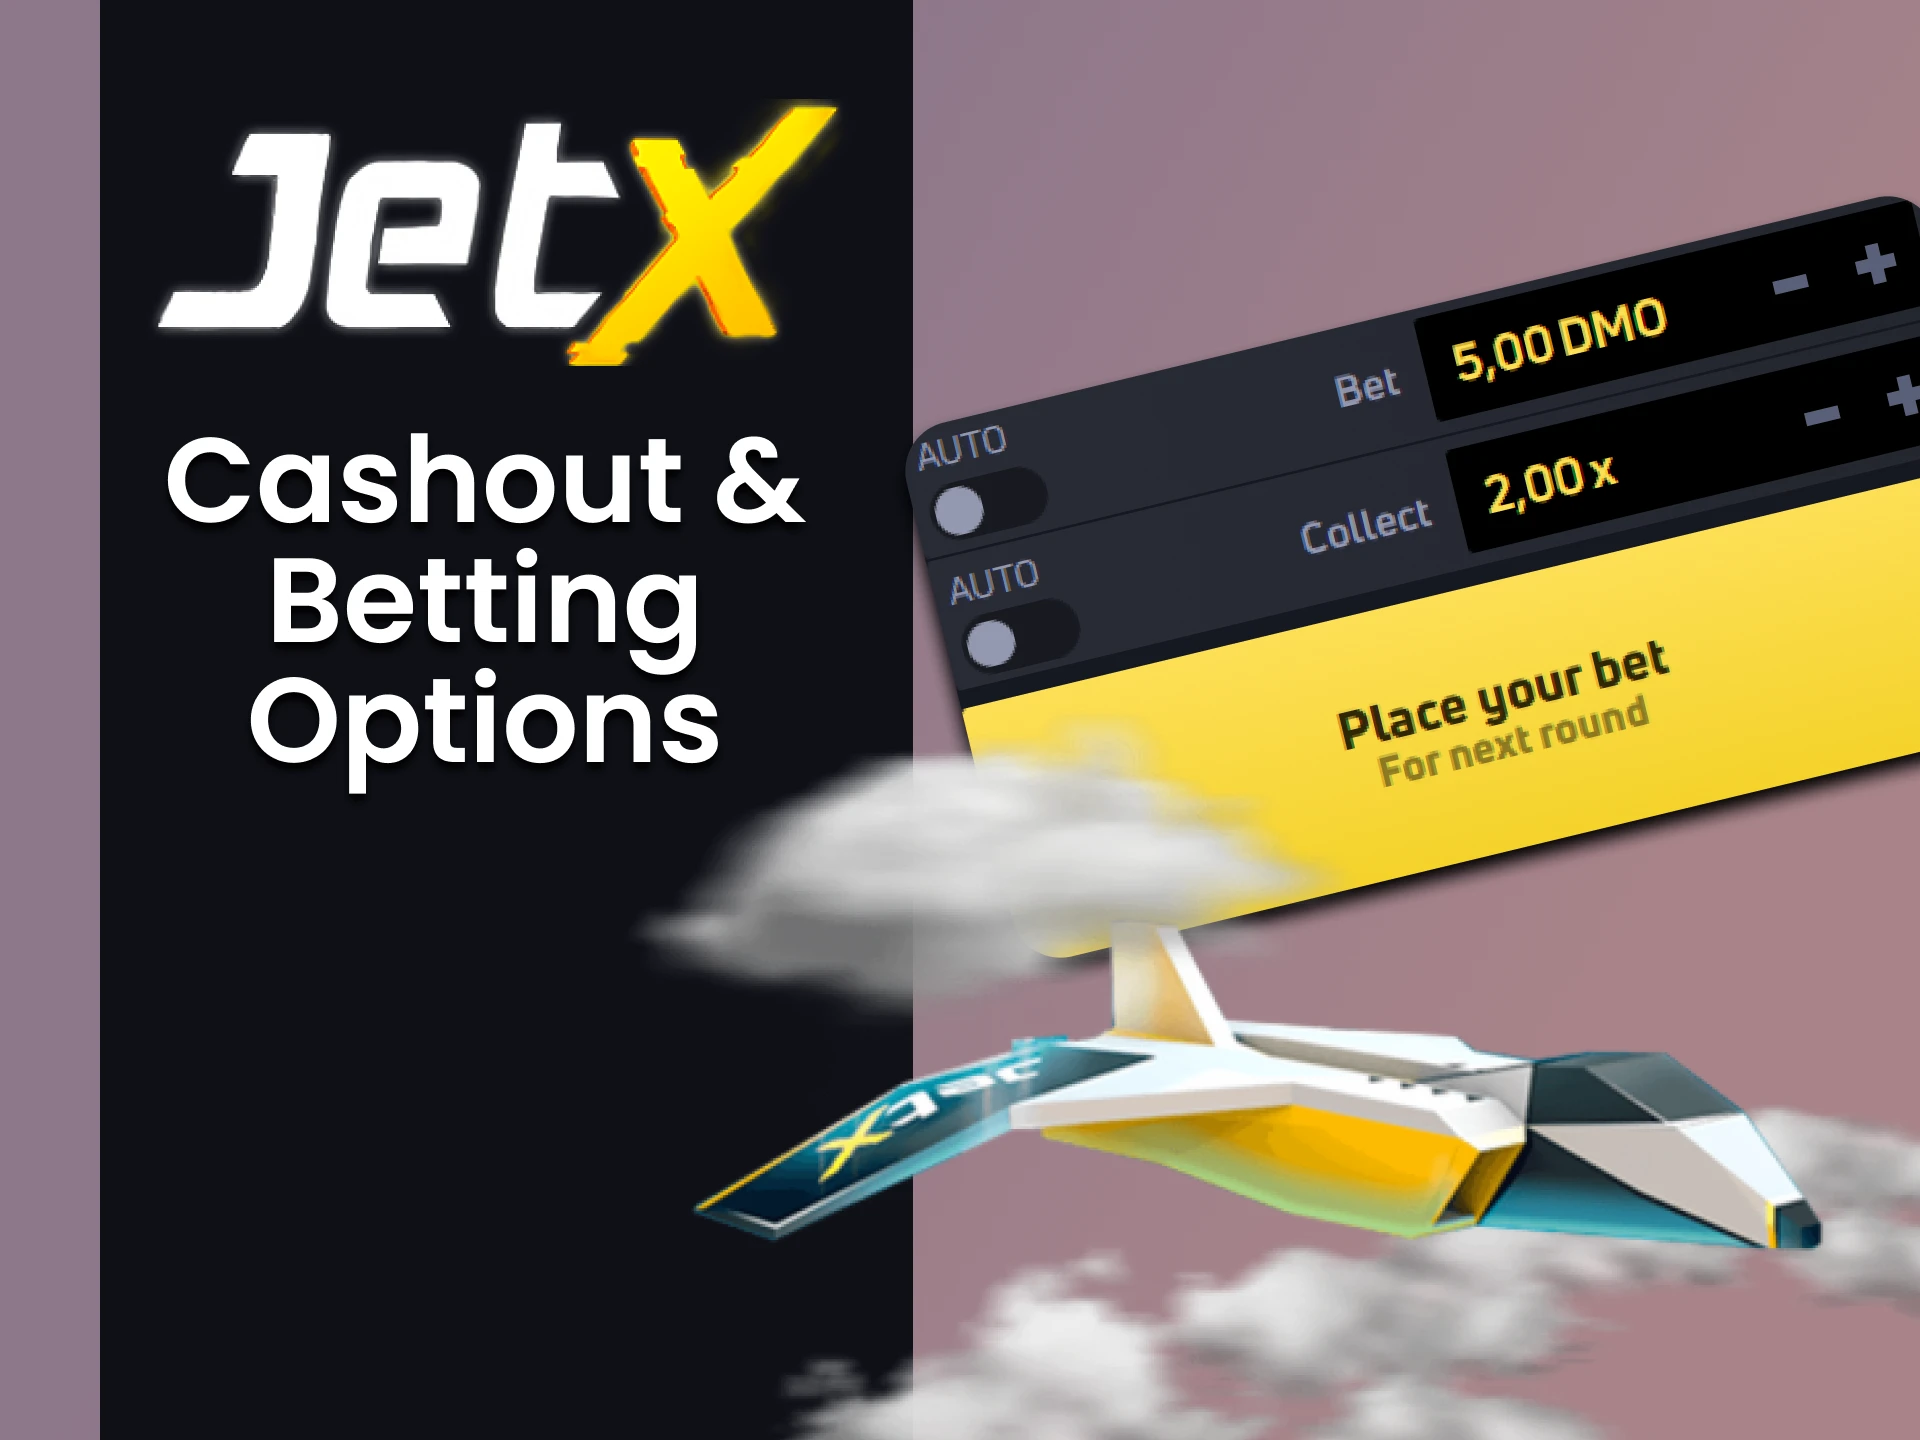 Learn about the possibilities of betting in the game JetX.